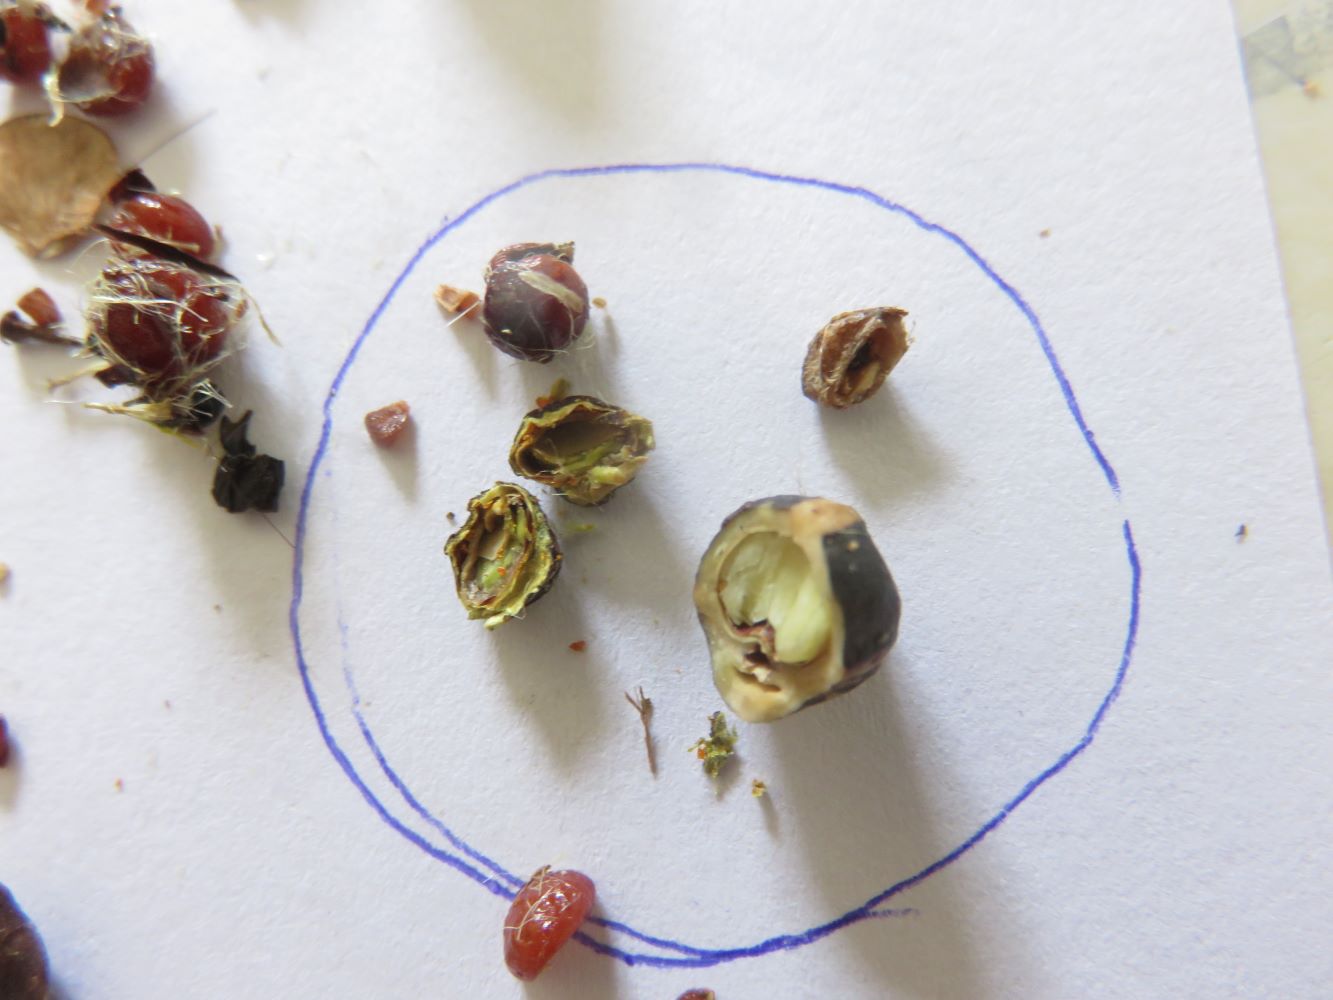 We inspected a wide range of seeds of South African plants